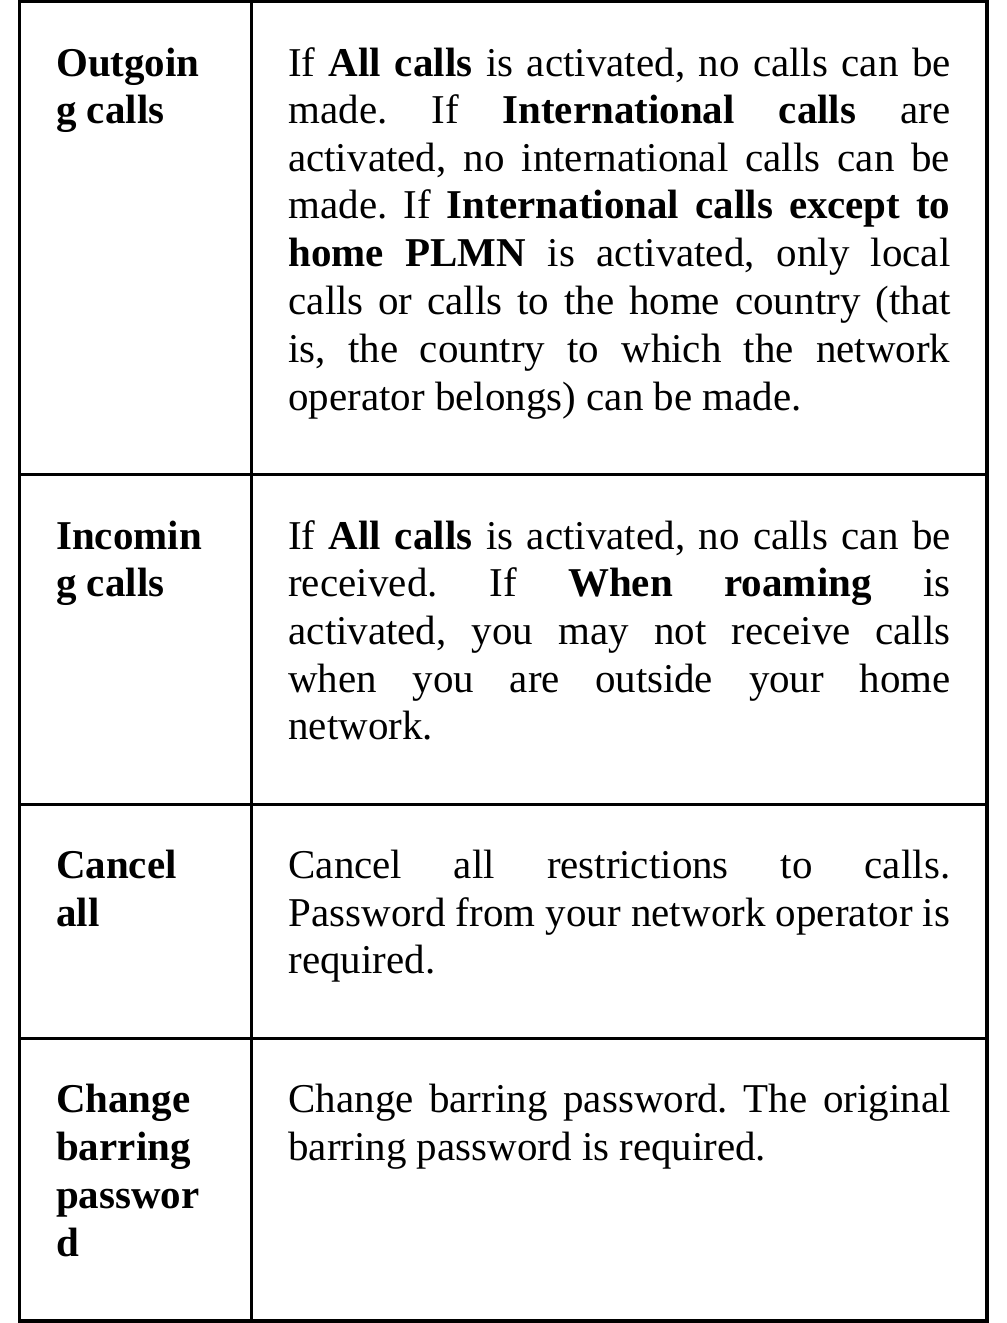  Outgoing calls  If All calls is activated, no calls can be made. If International calls are activated, no international calls can be made. If International calls except to home PLMN is activated, only local calls or calls to the home country (that is, the country to which the network operator belongs) can be made. Incoming calls  If All calls is activated, no calls can be received. If When roaming is activated, you may not receive calls when you are outside your home network. Cancel all  Cancel all restrictions to calls. Password from your network operator is required. Change barring password Change barring password. The original barring password is required. 